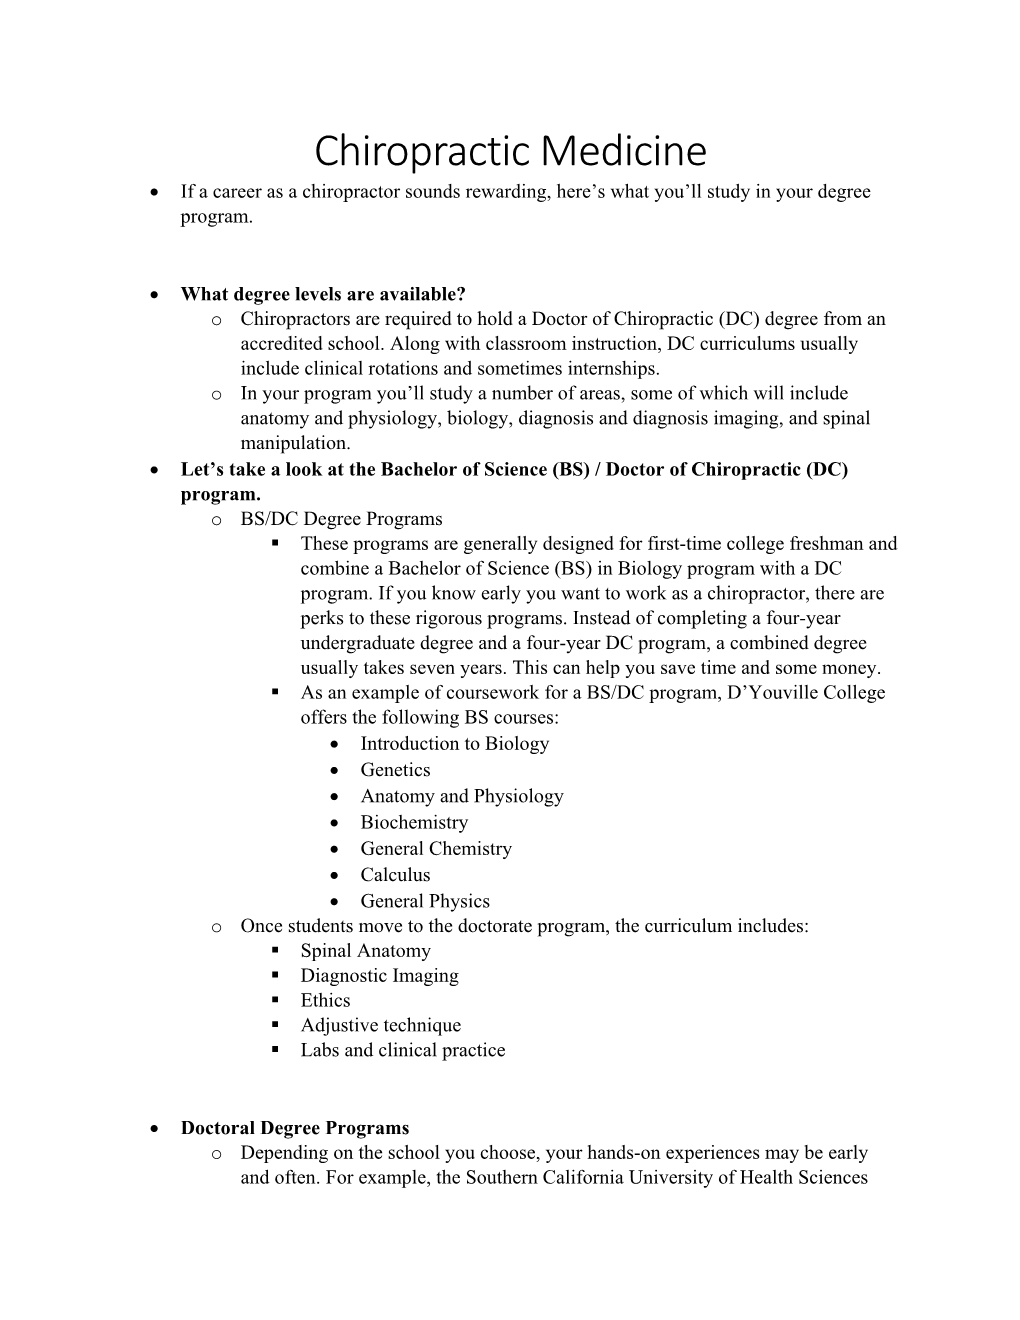 Chiropractic Medicine  If a Career As a Chiropractor Sounds Rewarding, Here’S What You’Ll Study in Your Degree Program